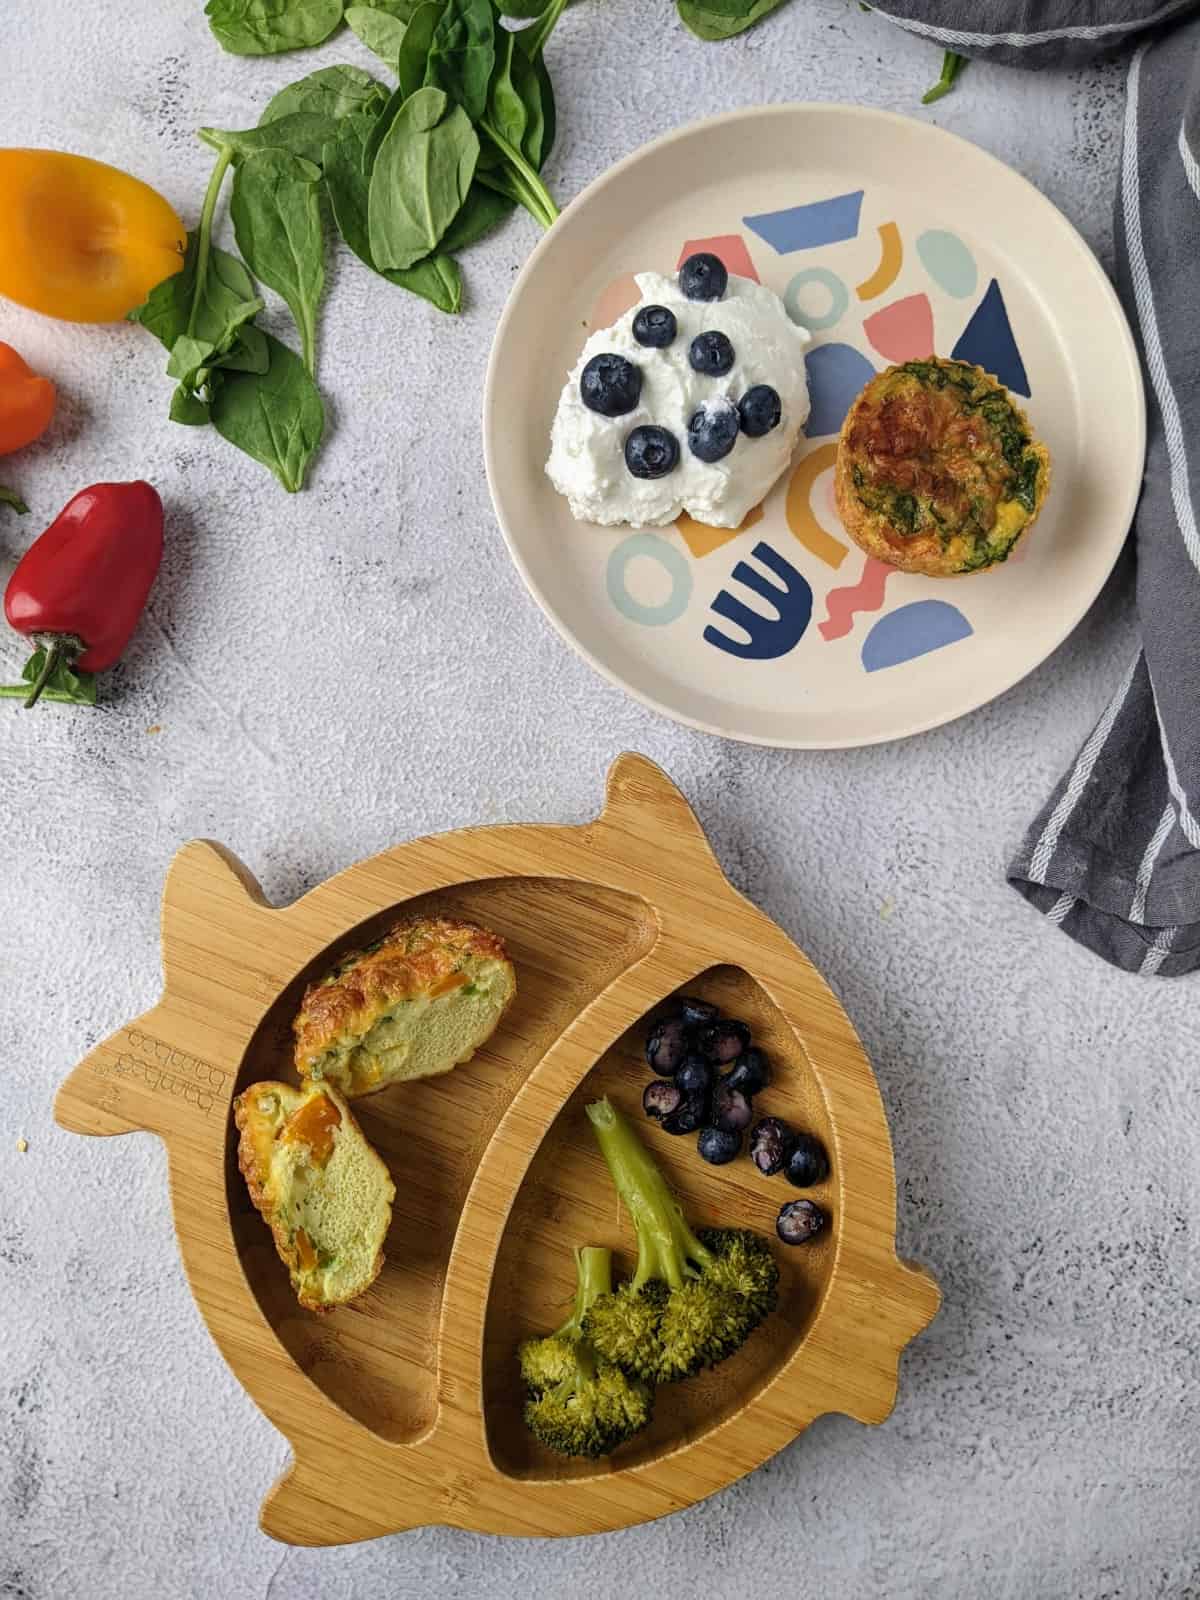 Egg muffins served on bamboo plate for baby with broccoli and blueberries and for toddler with yogurt and blueberries.